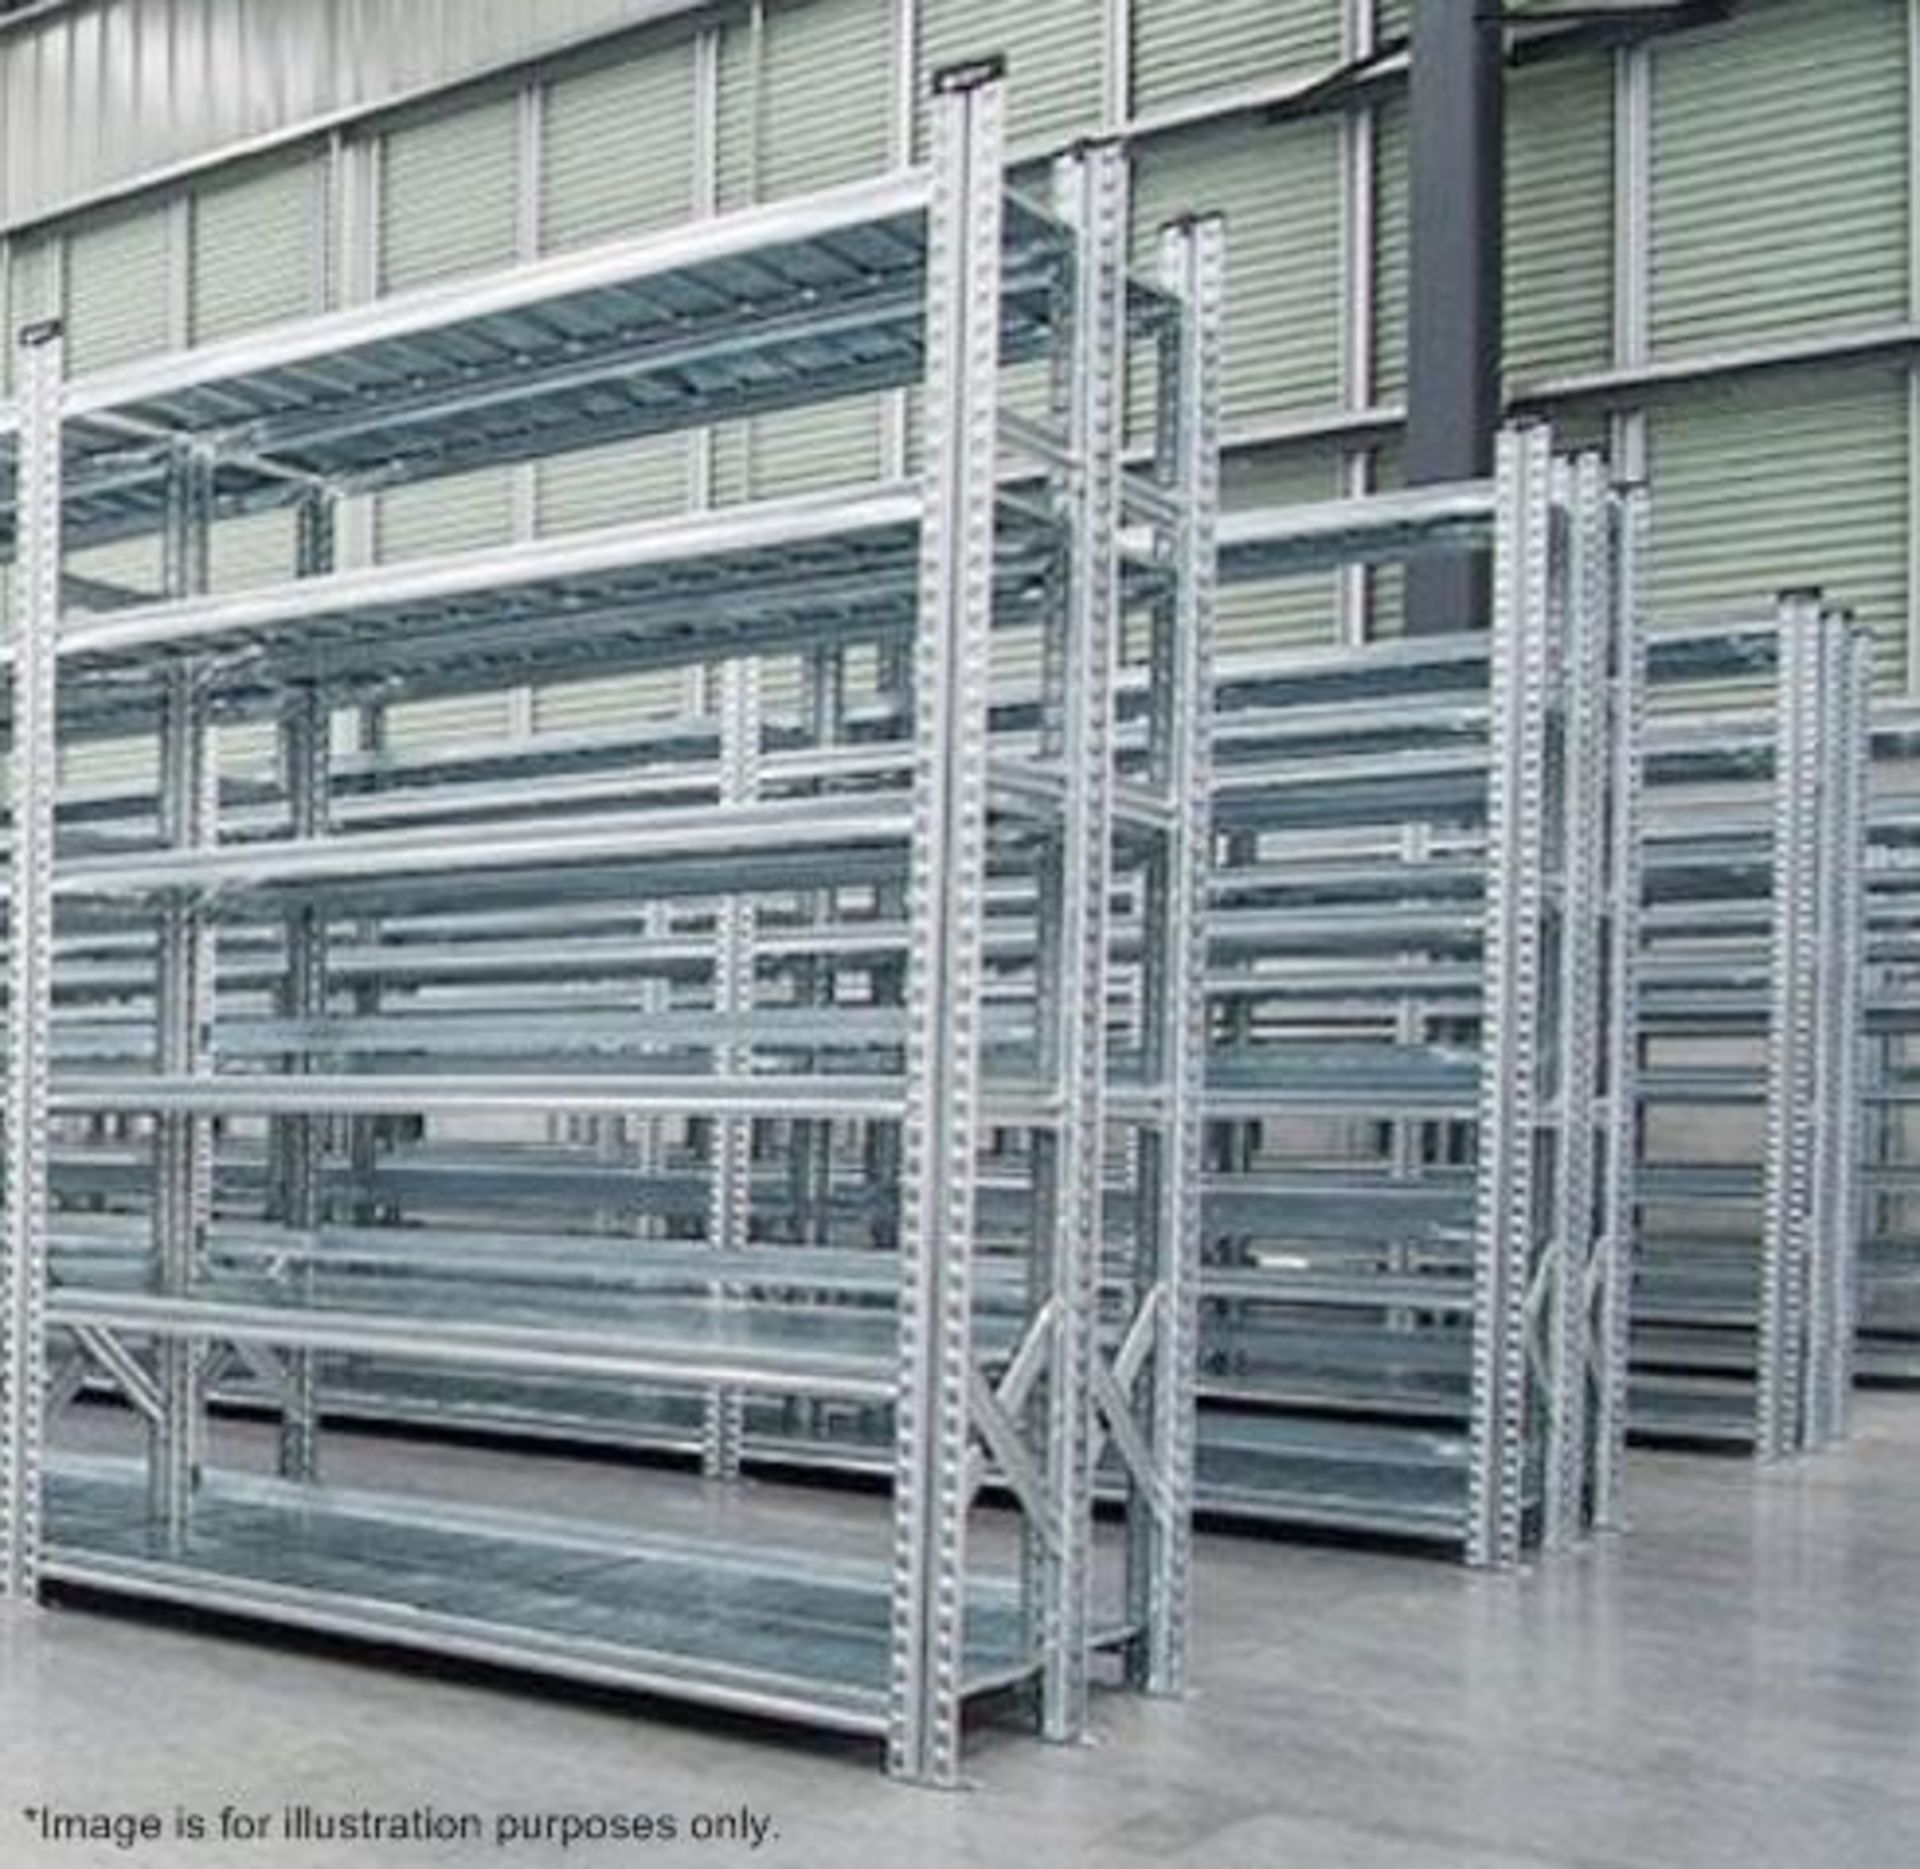 4 x Bays of Metalsistem Steel Modular Storage Shelving - Includes 29 Pieces - Recently Removed - Image 14 of 17